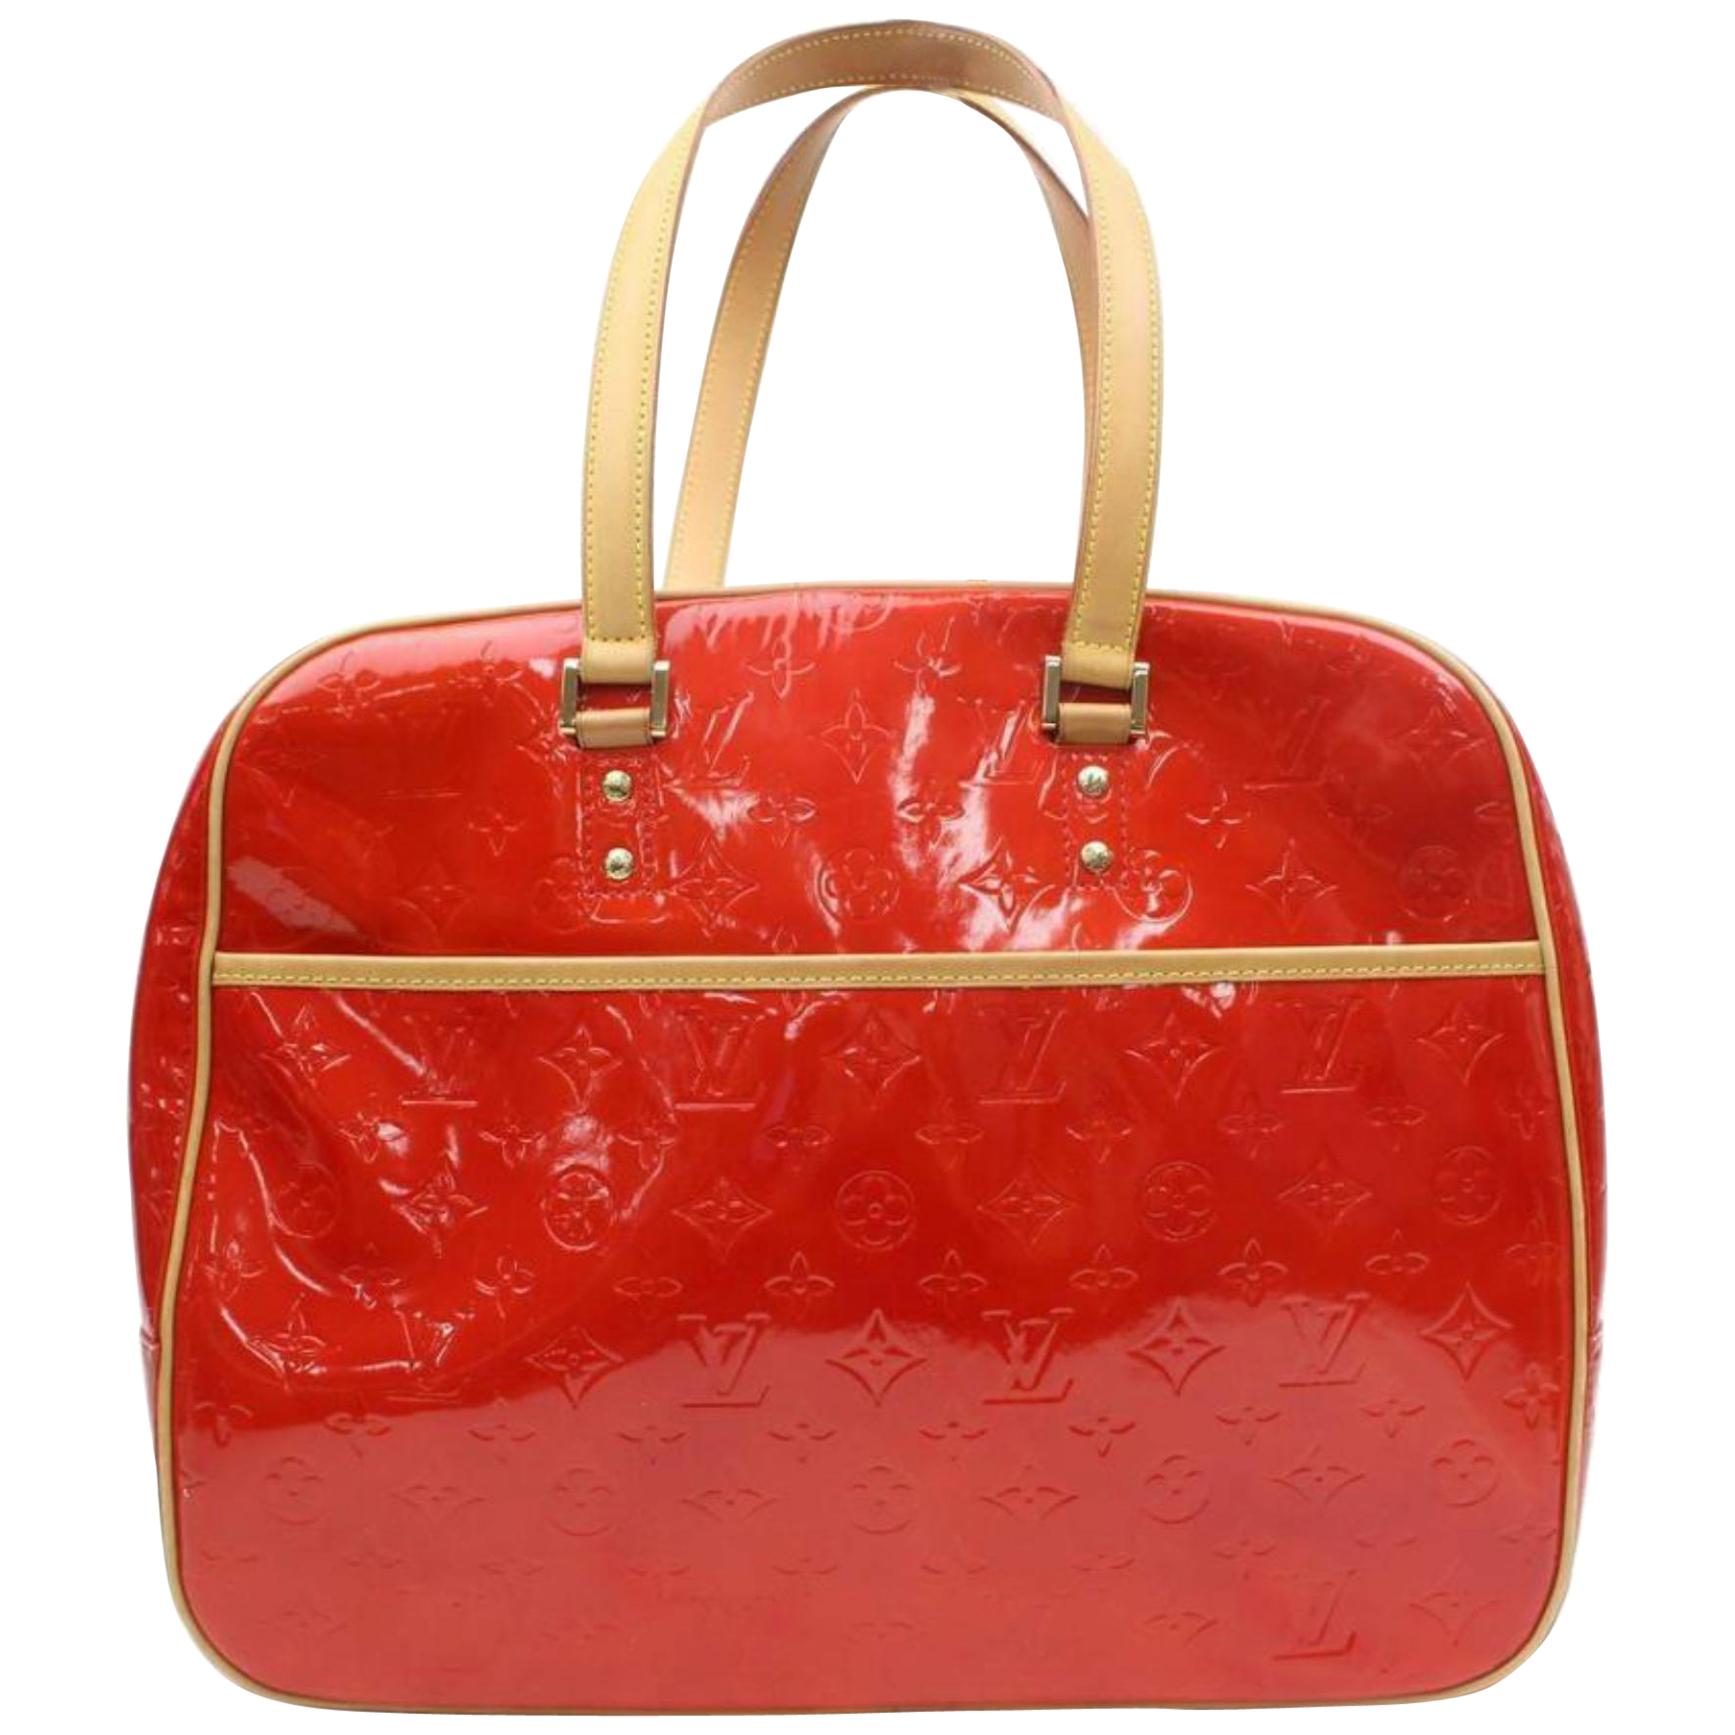 Louis Vuitton Vernis Zip Tote 870301 Red Patent Leather Weekend/Travel BAG For Sale